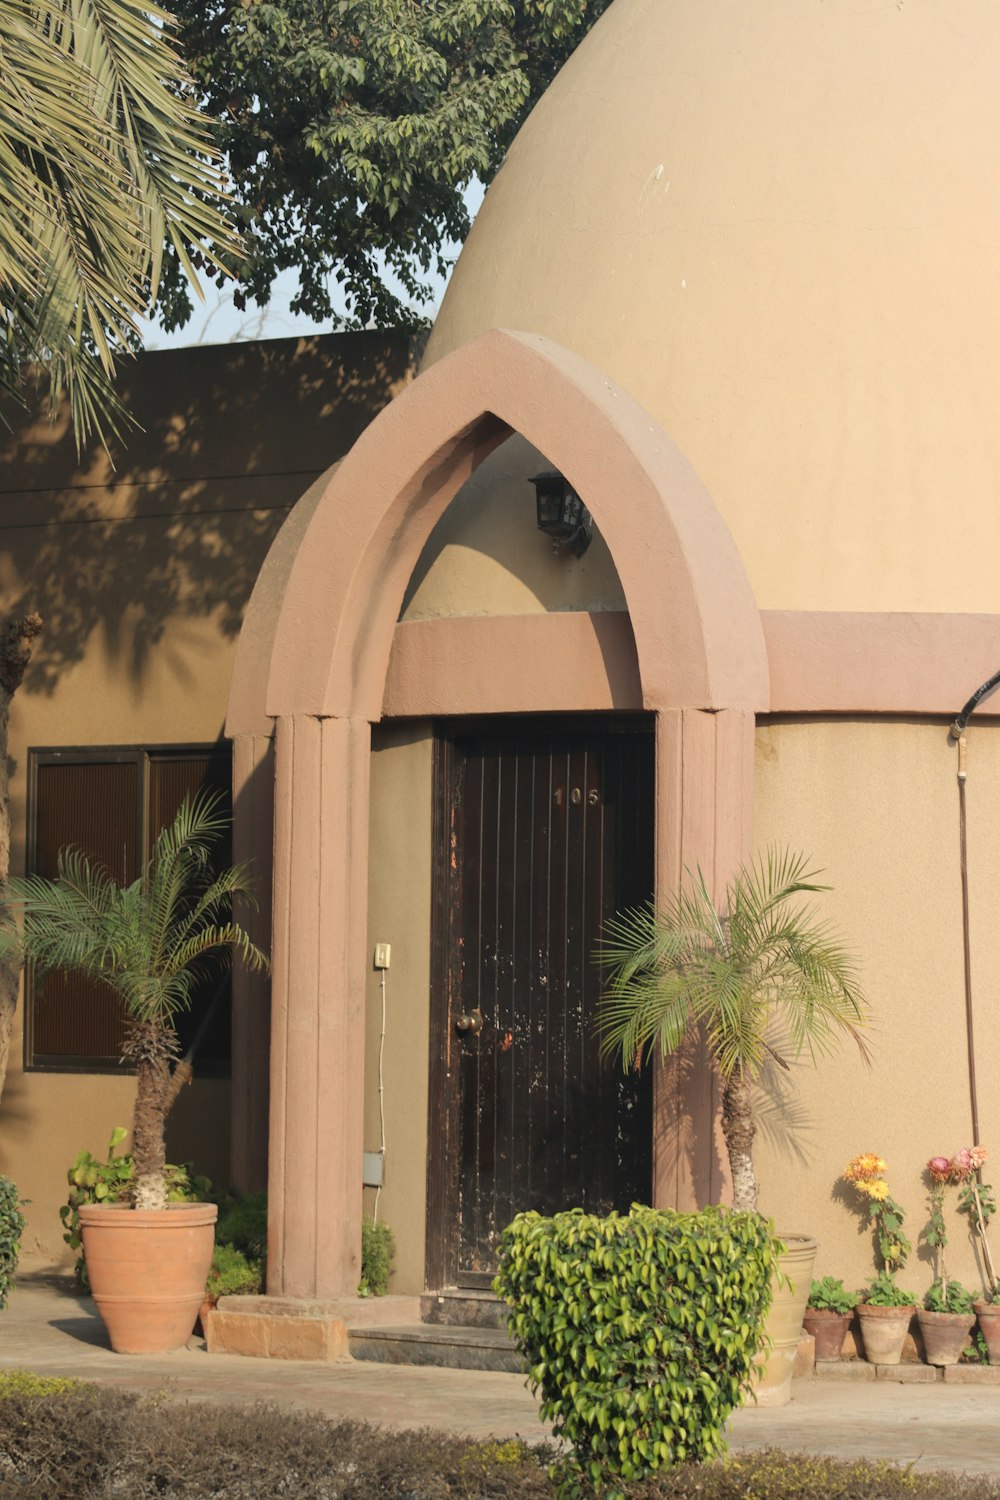 a building with a large arched doorway next to a palm tree